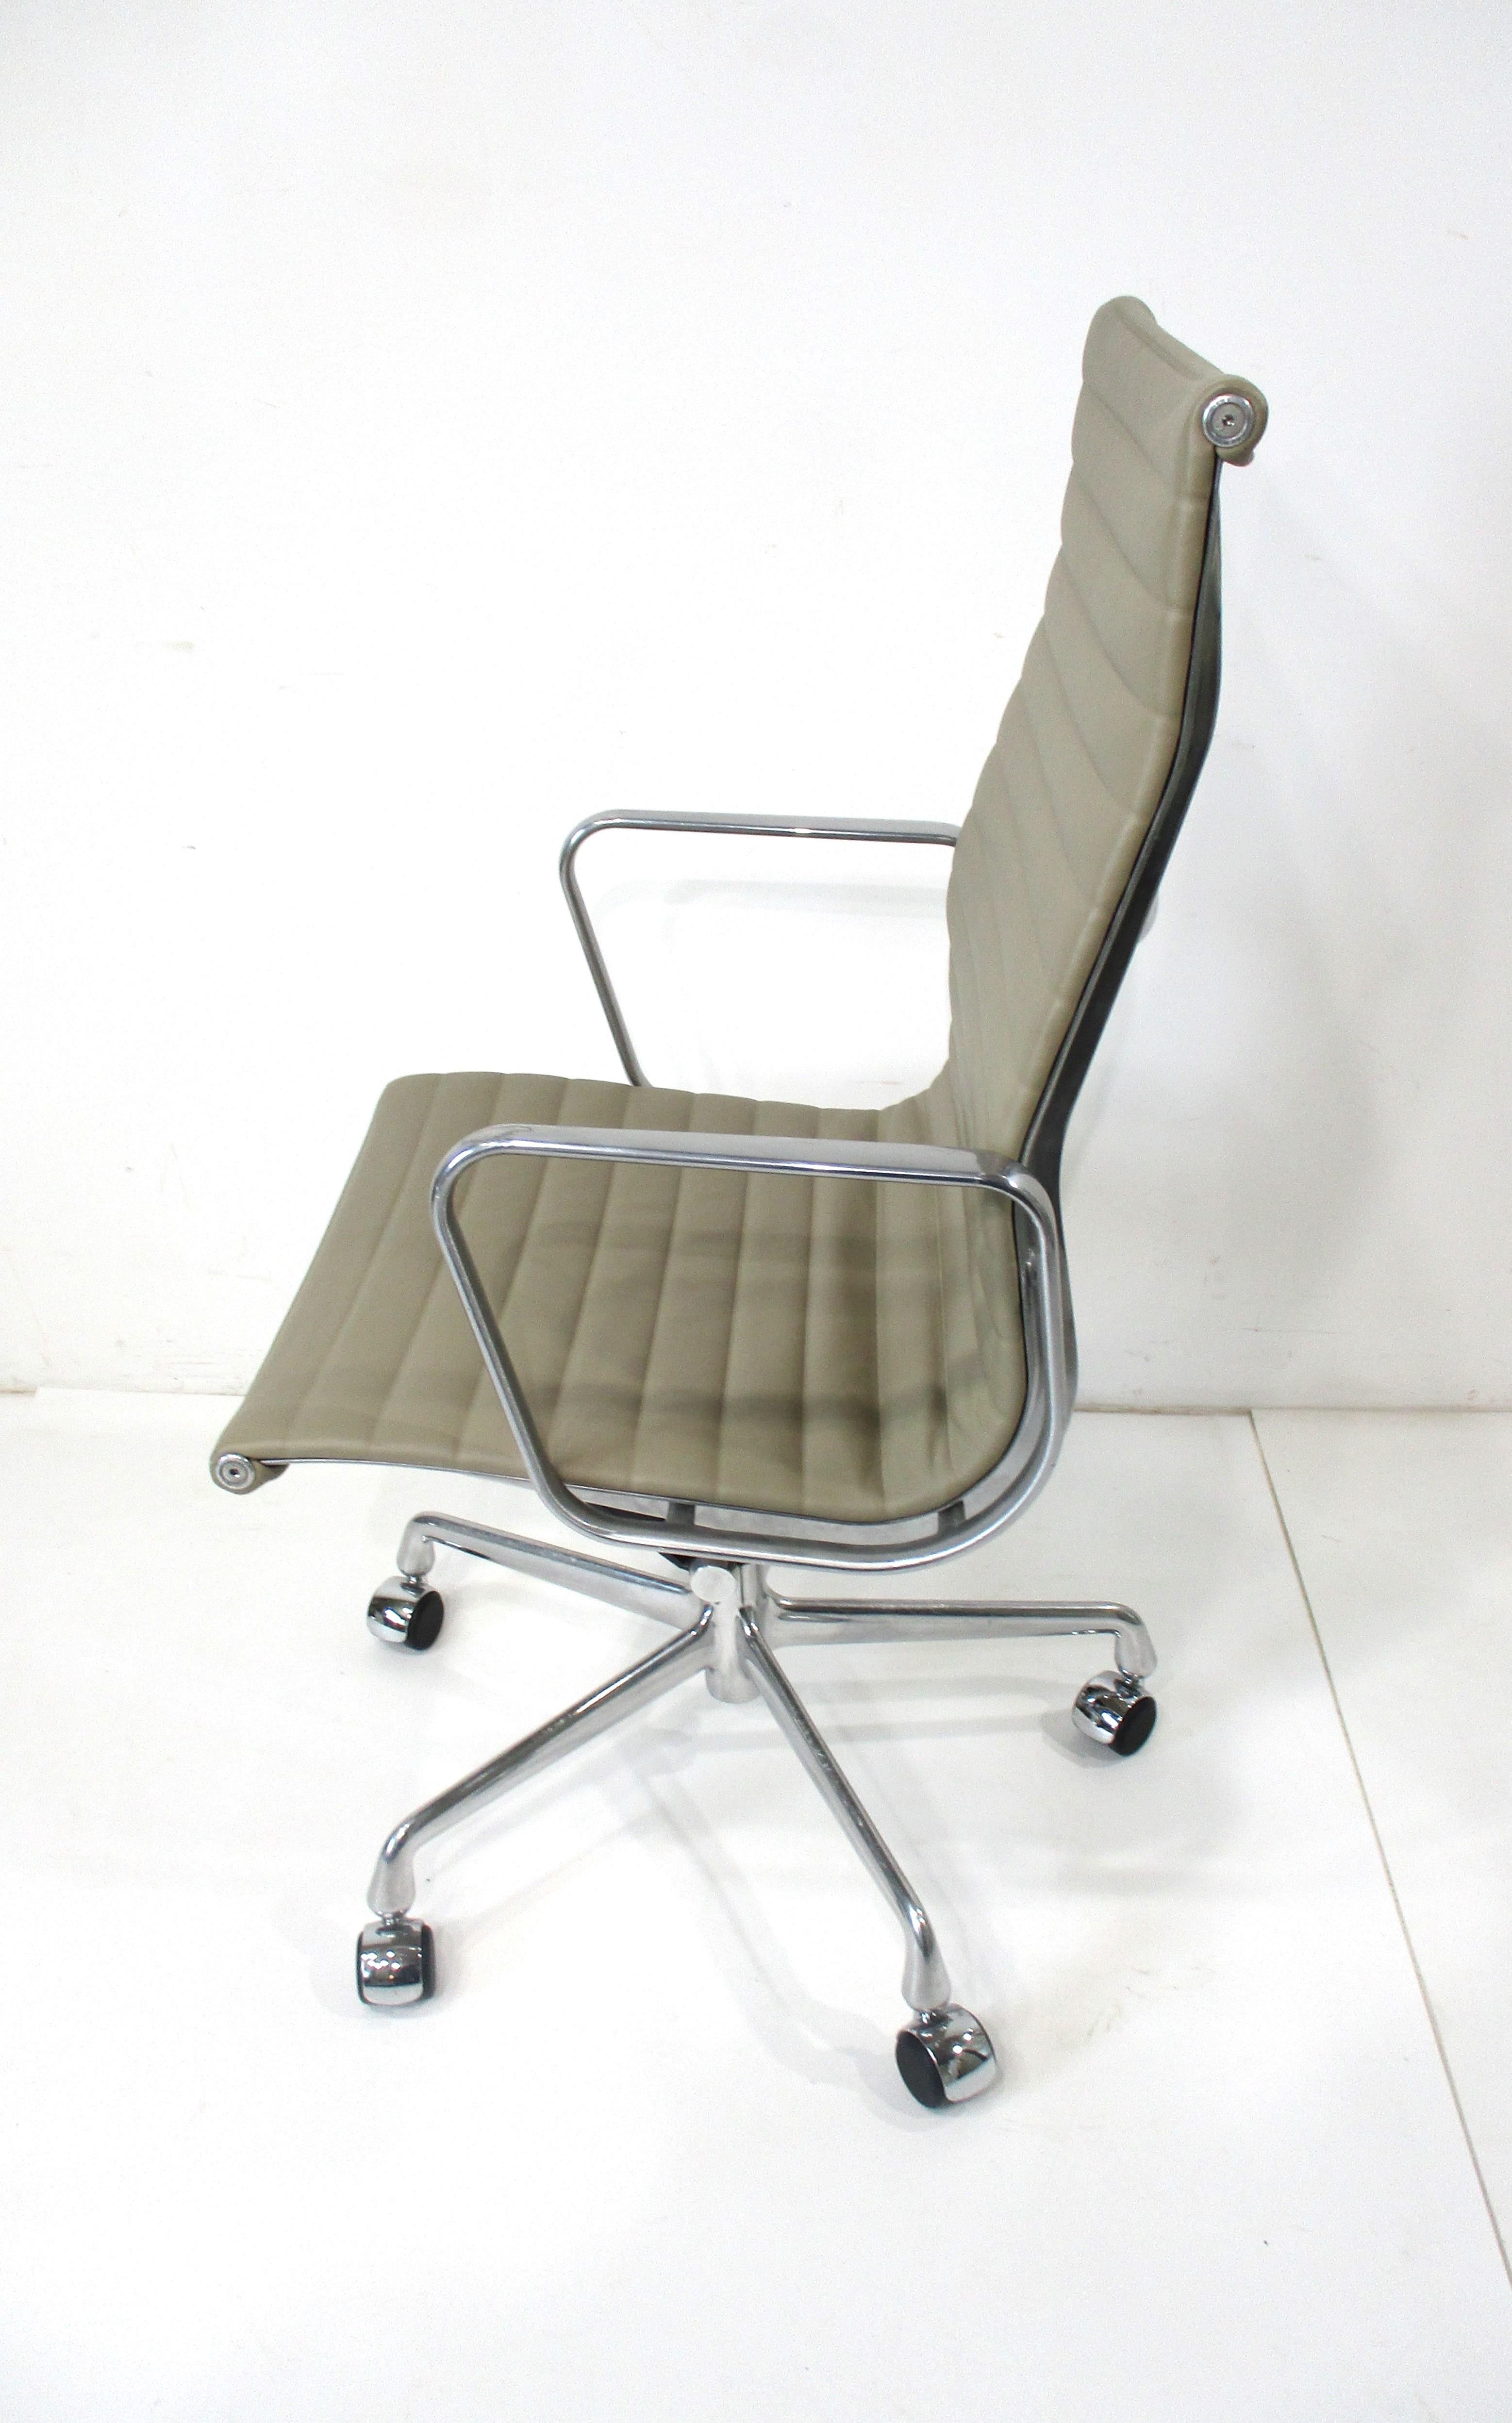 A 50th Anniversary edition 1958 - 2008 executive rolling high back aluminum group chair . Upholstered in a smooth and soft taupe spinney back leather only for this edition with polished aluminum star base . This iconic chair is still as fresh today